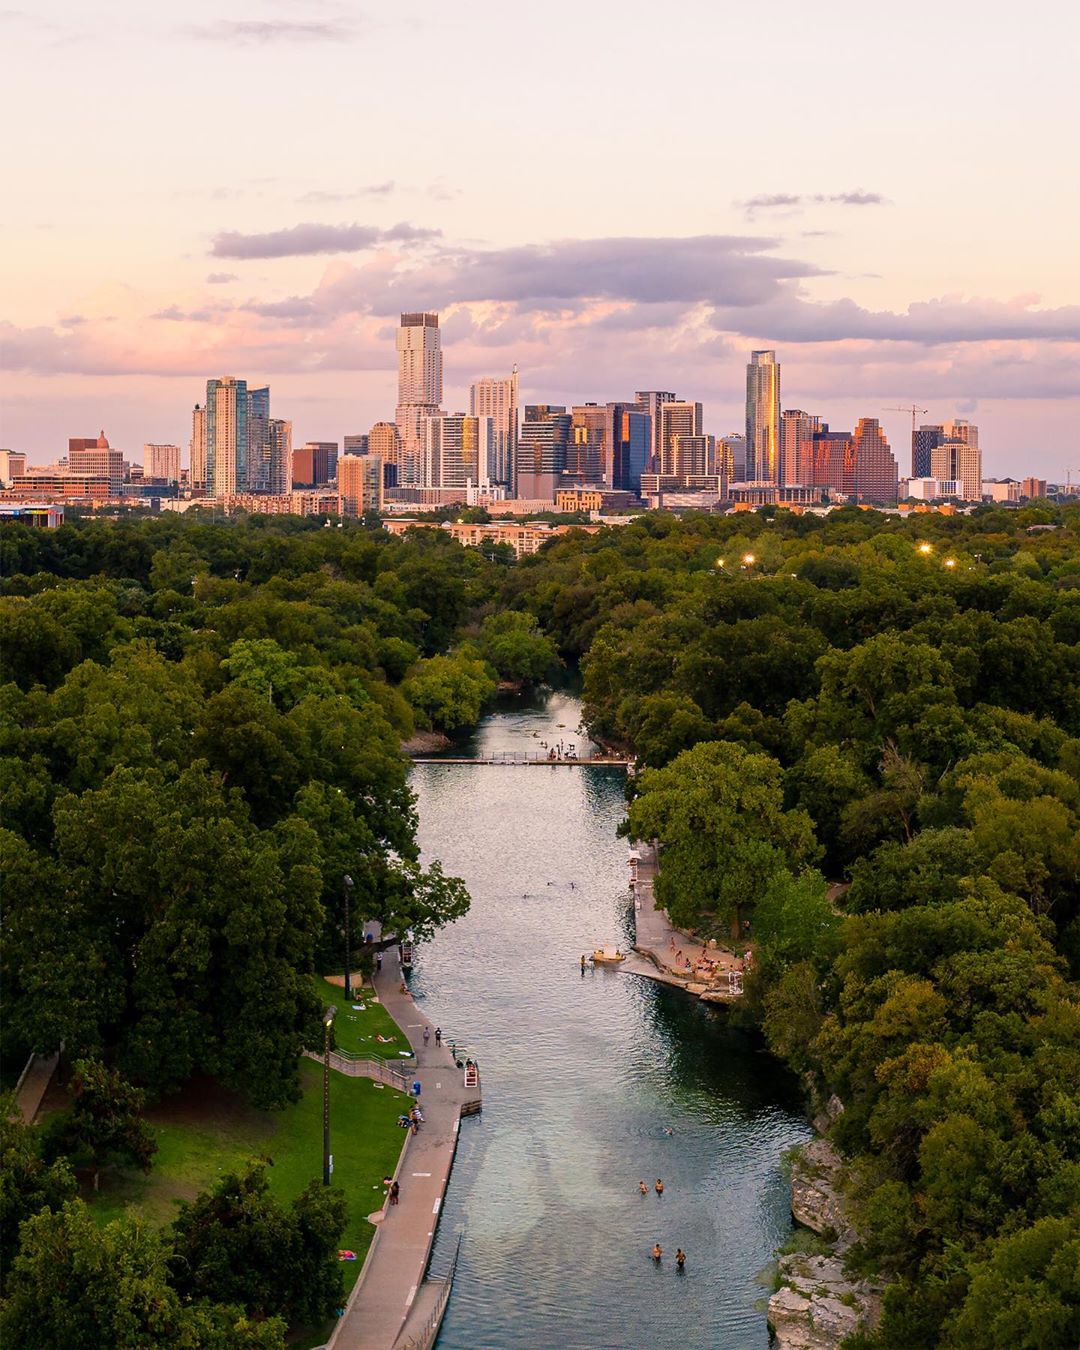 View of Downtown Austin from the Barton Springs Pool. Photo by Instagram user @flowkyte